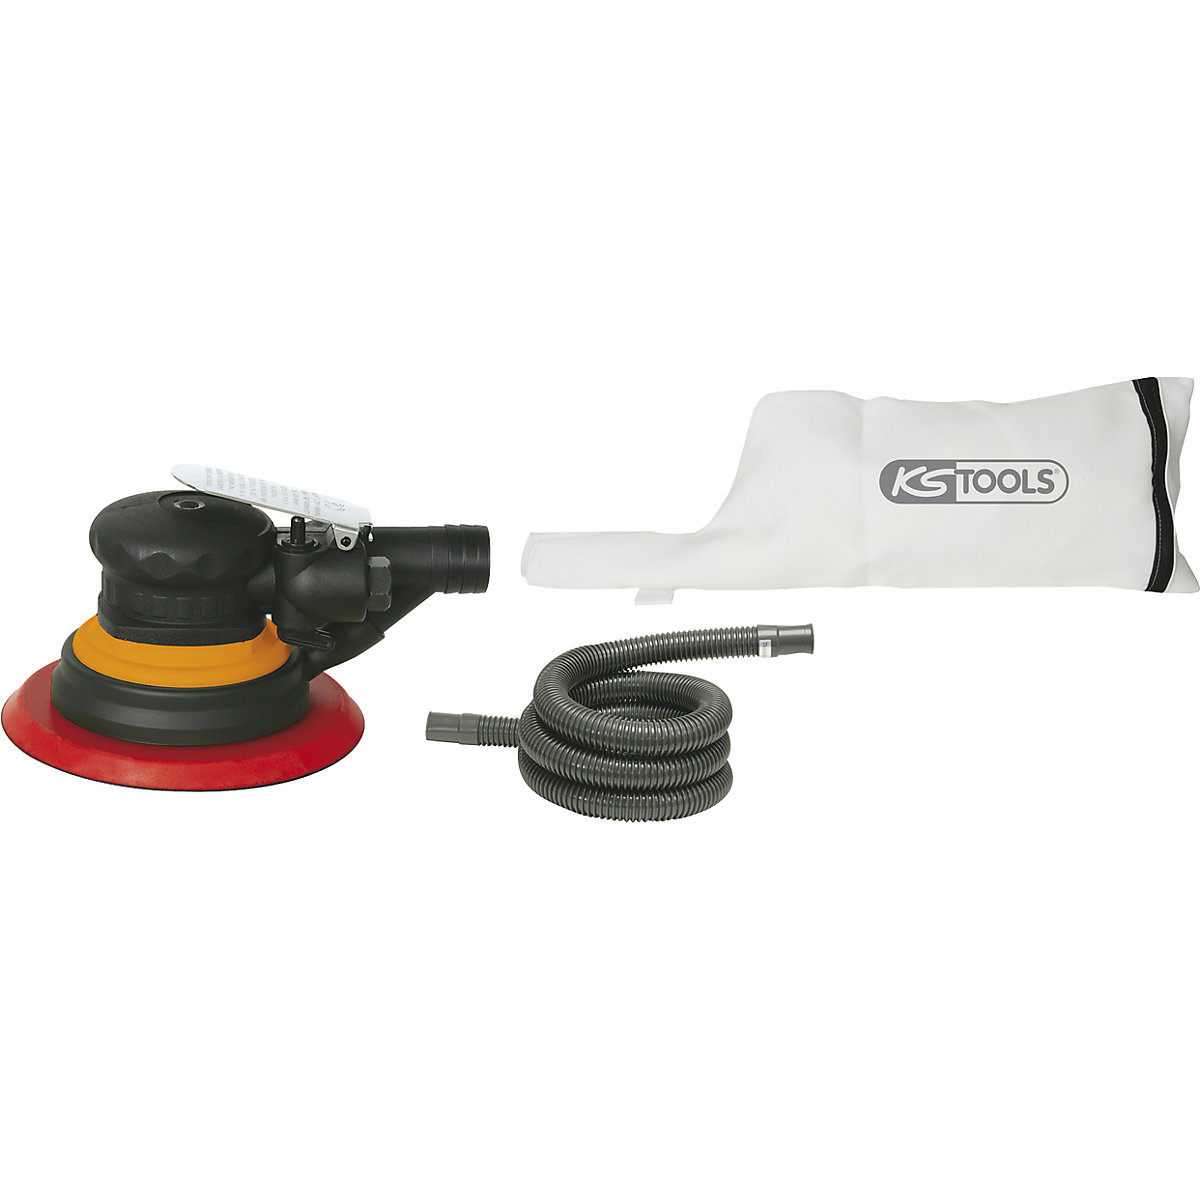 Pneumatic eccentric sander with dust extraction - KS Tools